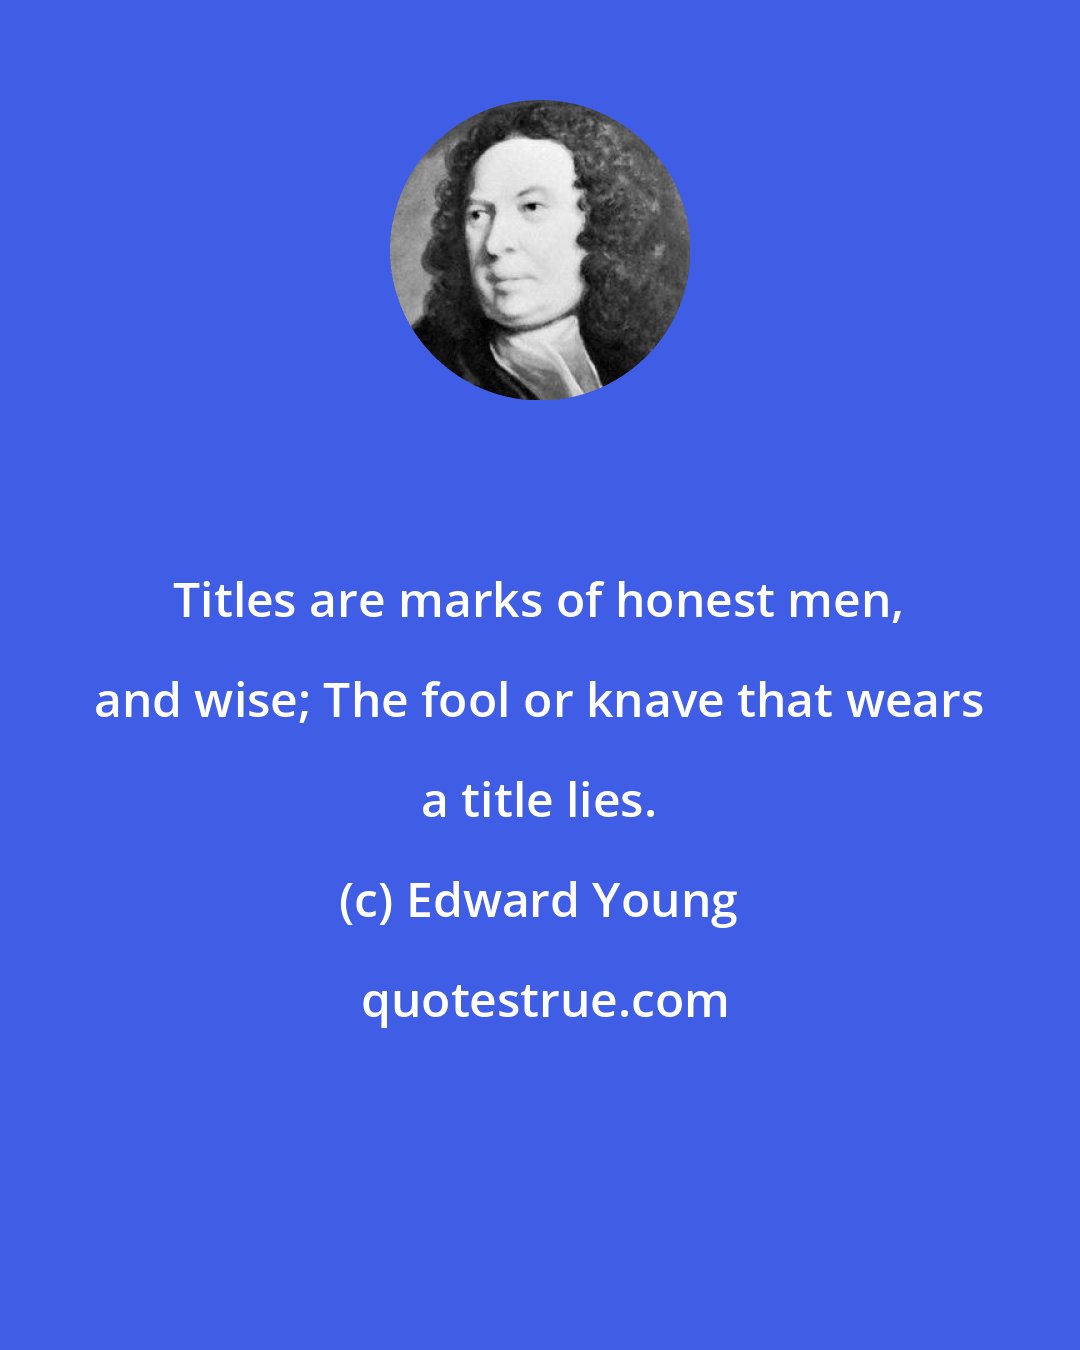 Edward Young: Titles are marks of honest men, and wise; The fool or knave that wears a title lies.